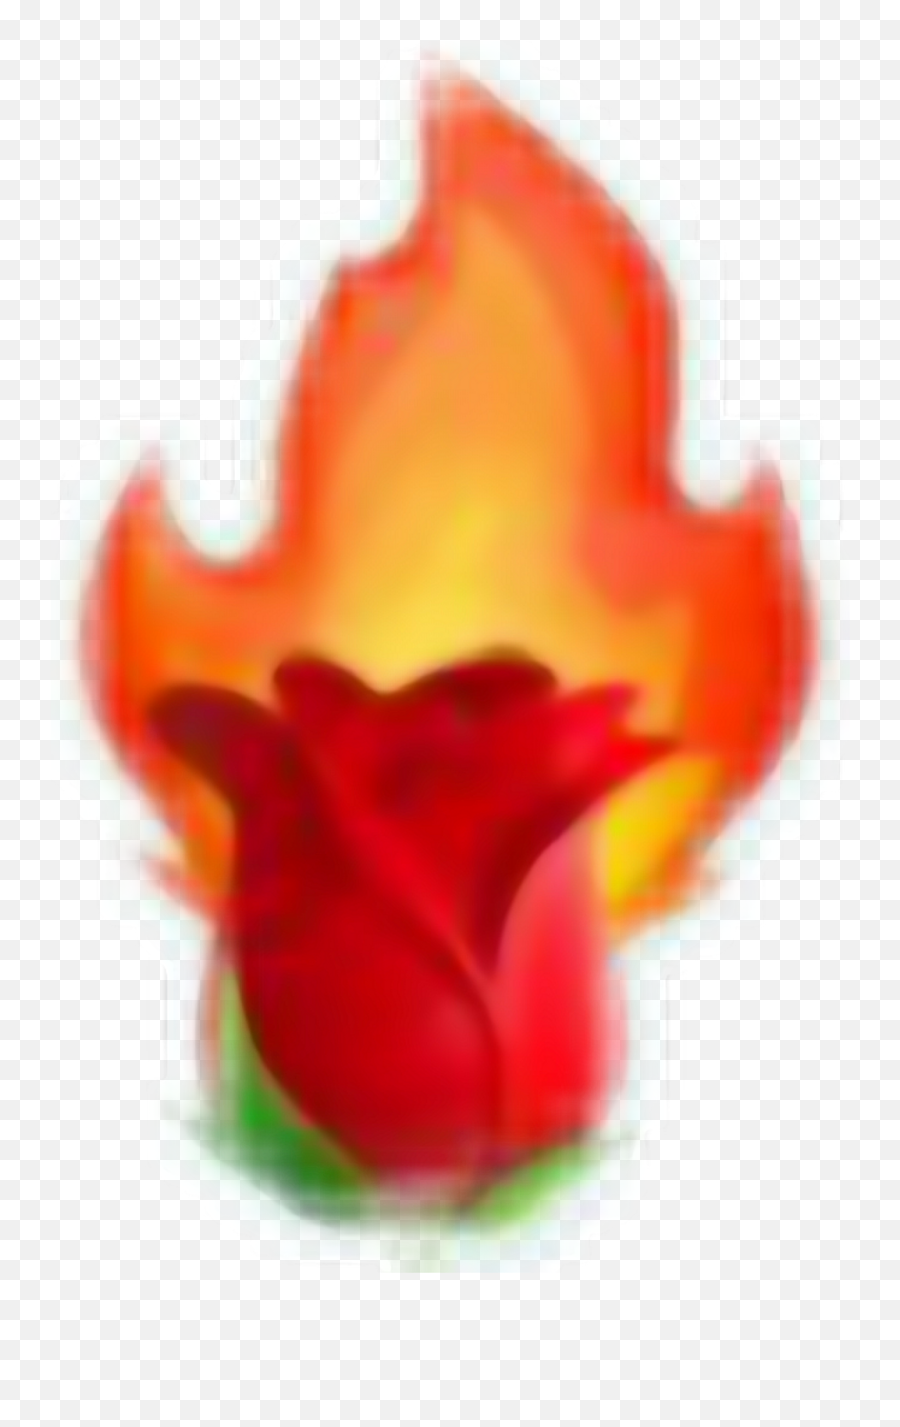 Download Rose Fire Tumblr Aesthetic Aestheticred Red Emojis - Lovely,Fire Emojis